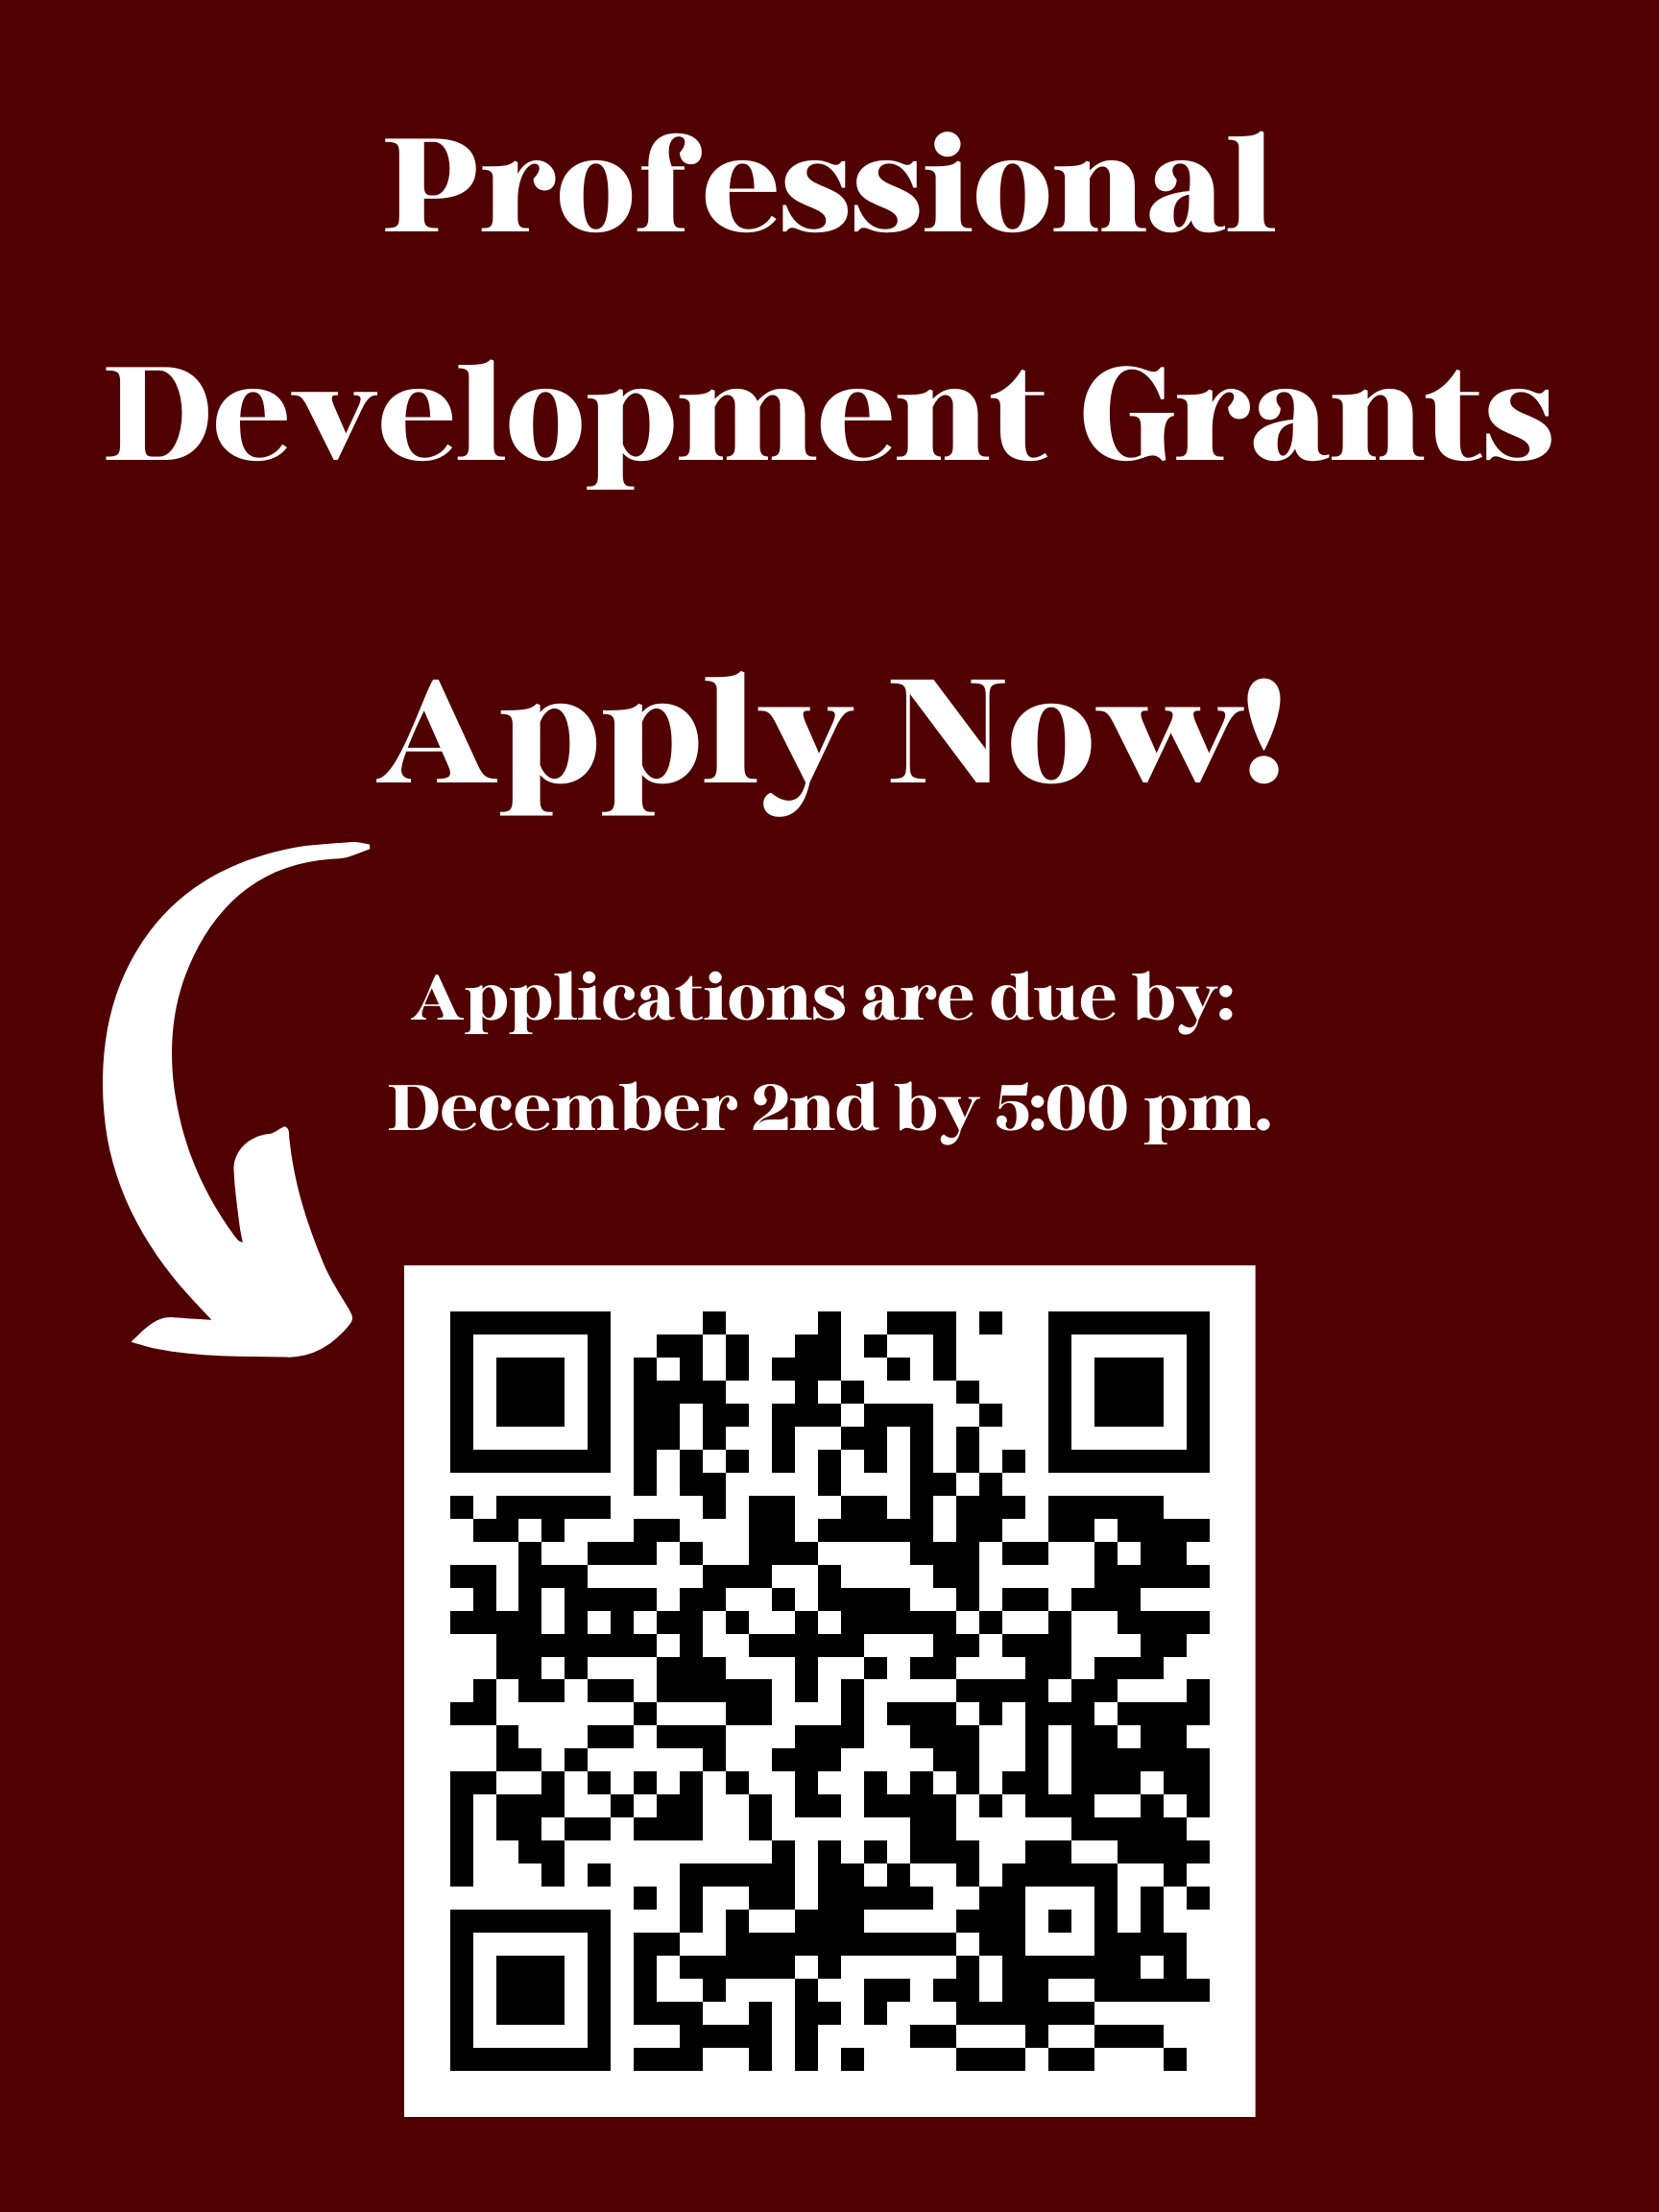 Professional development grants. Apply now! Applications are due by Dec. 2 by 5 p.m.